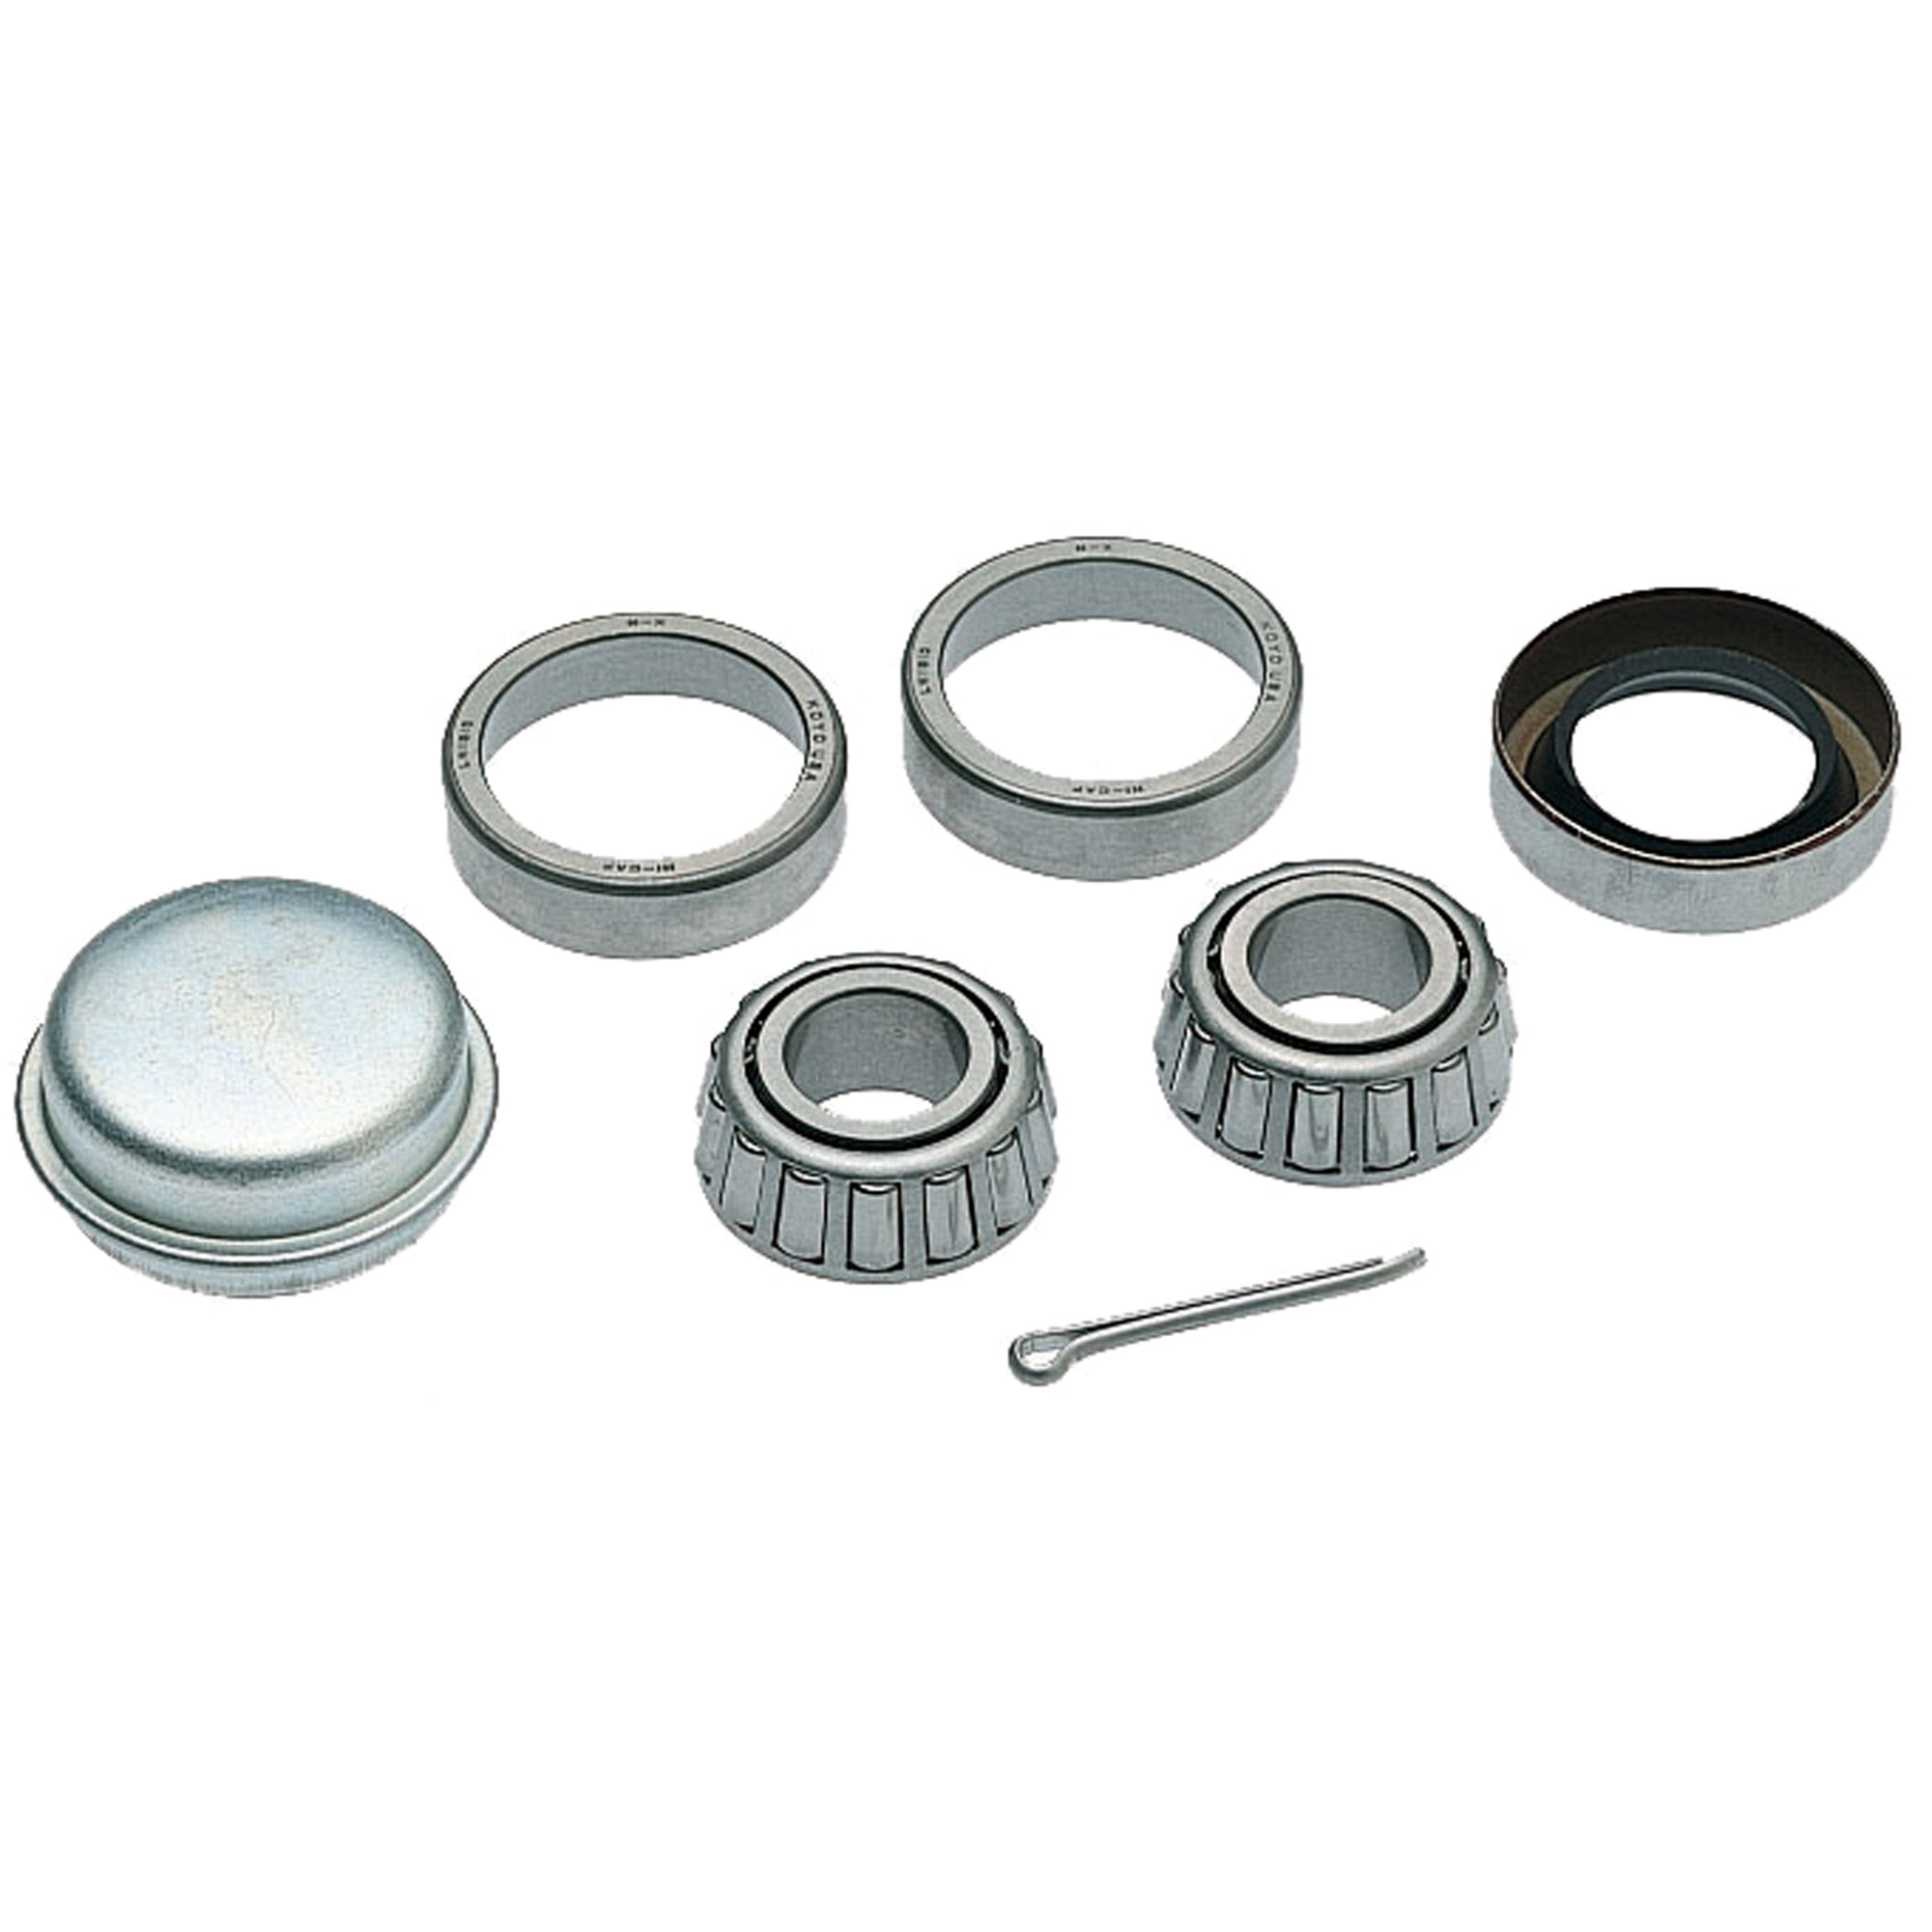 Dutton-Lainson 21821 6500 Series Bearing Set - 1-3/8 in. x 1-1/16 in. Spindle, 1.980 Outer Hub